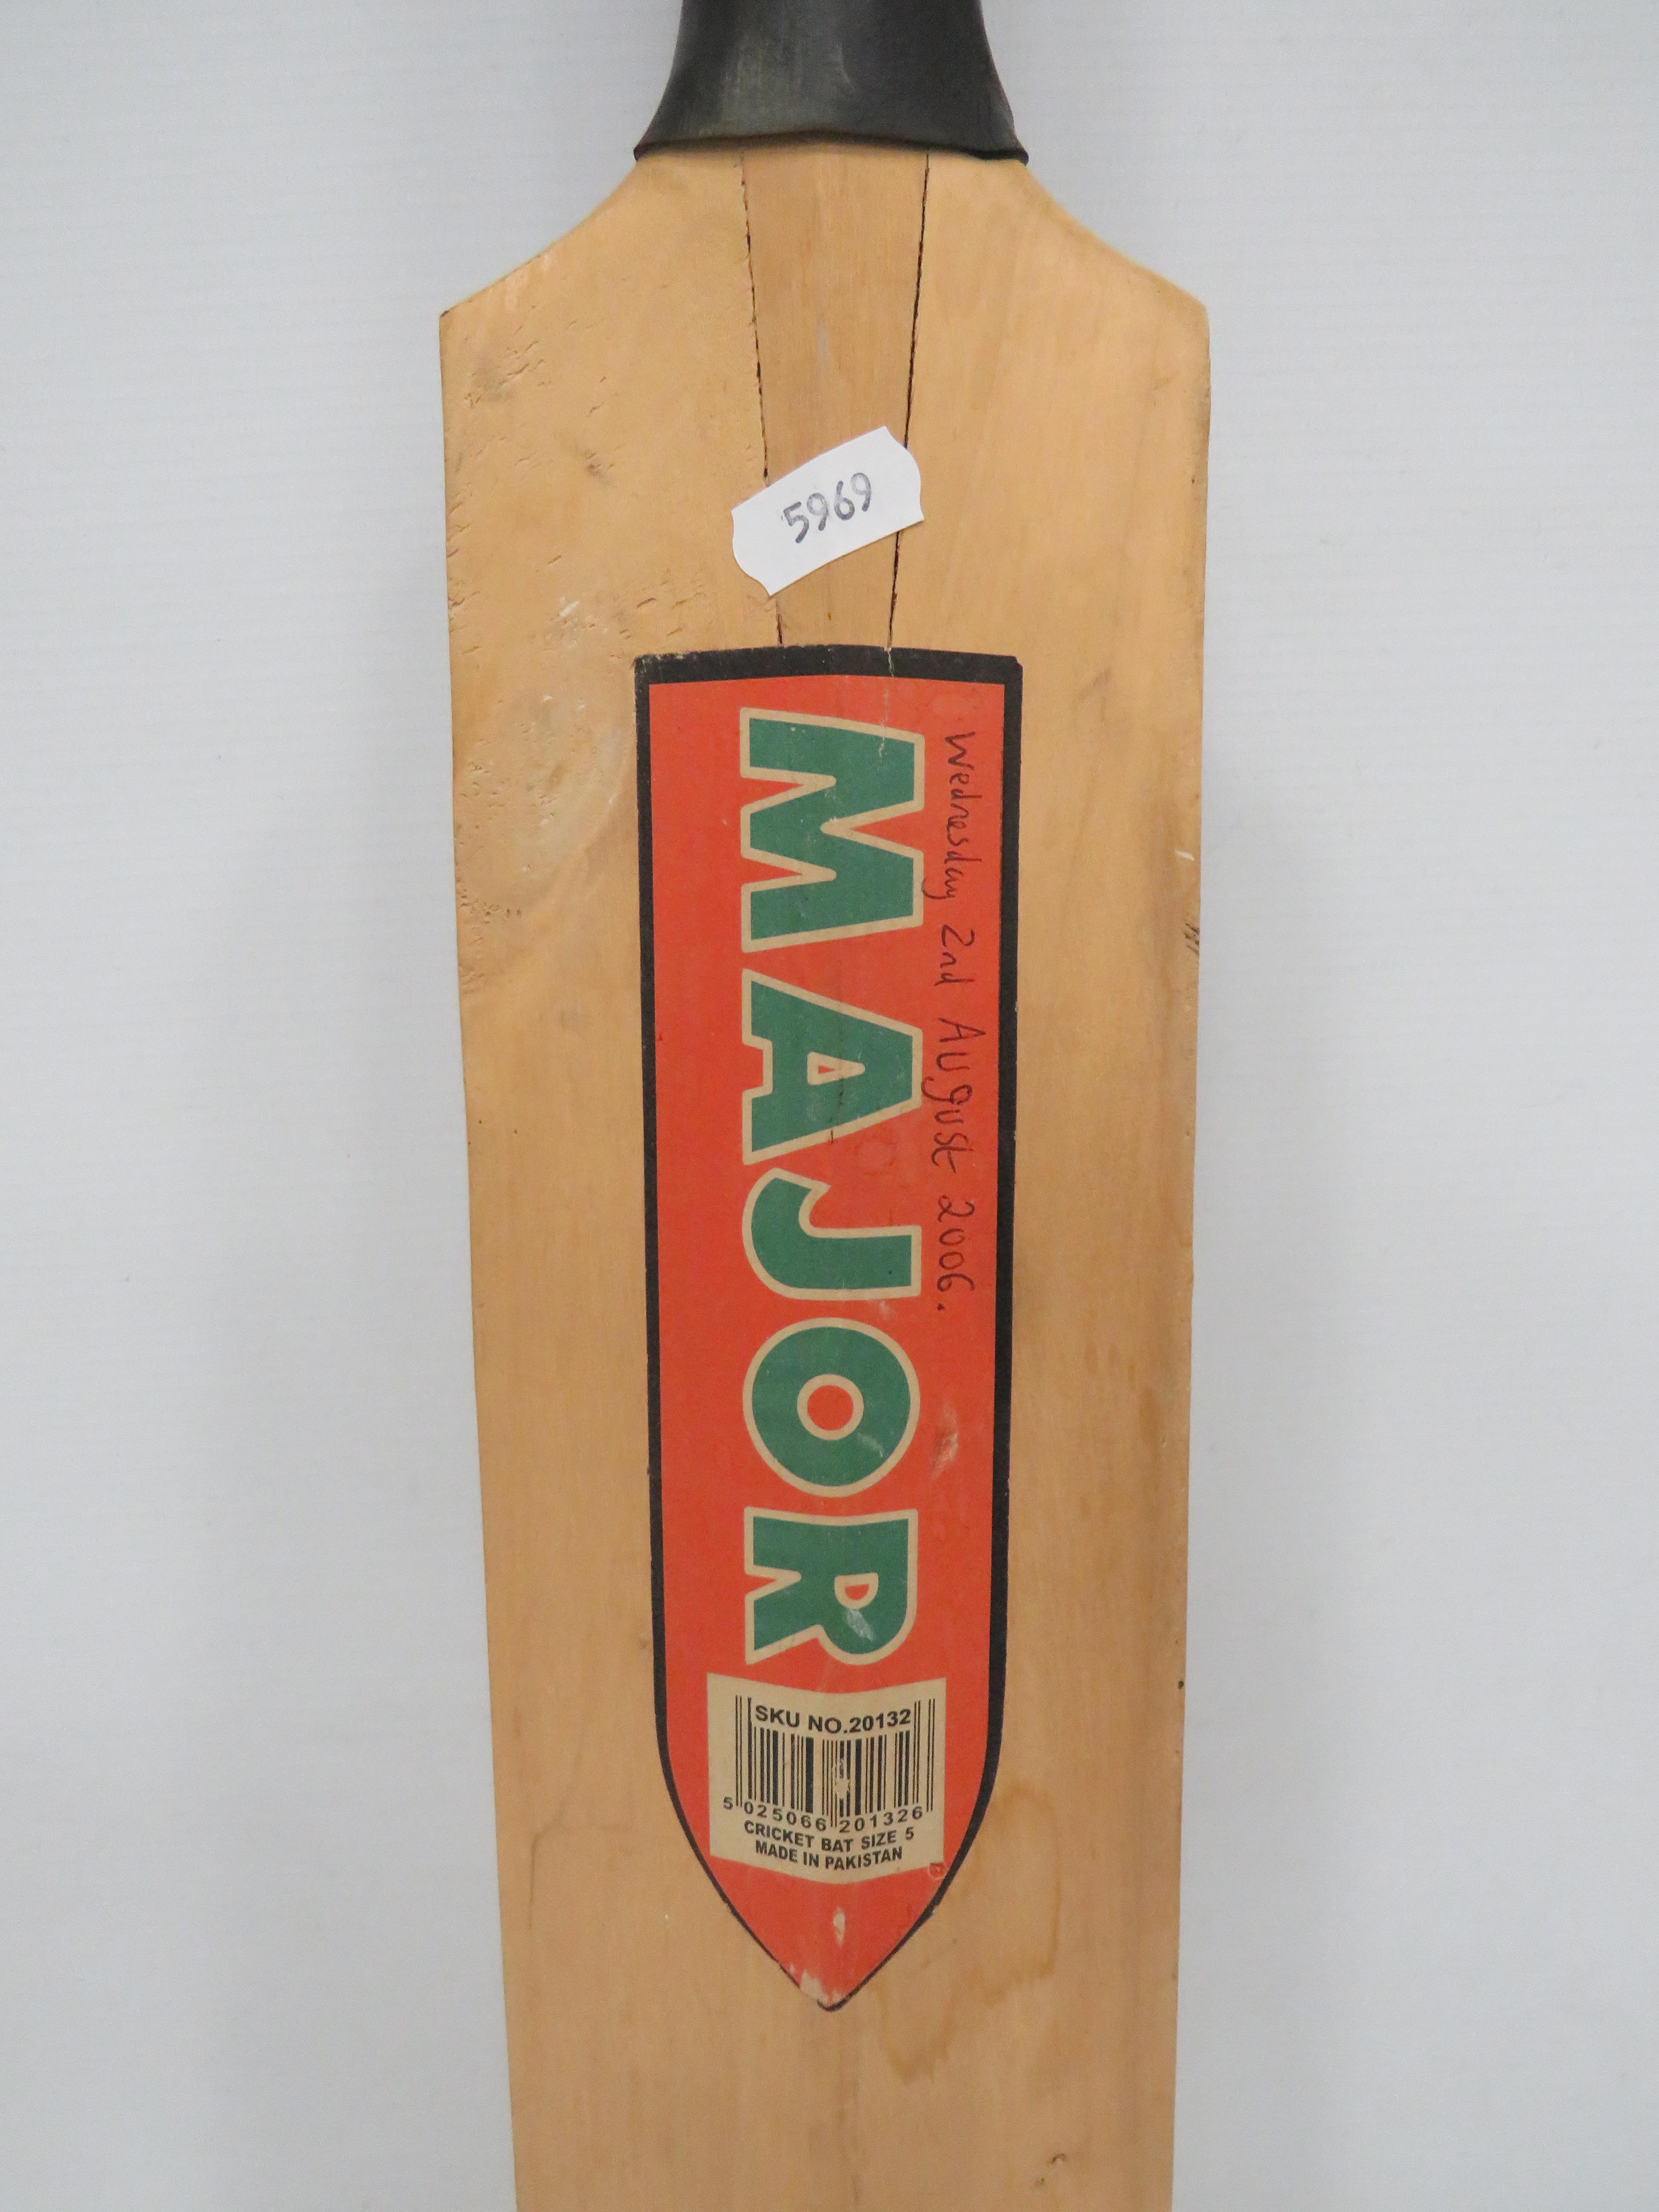 Childs Size Cricket bat by 'Major', 32 inches long. Indistinct signature to face. See photos - Image 4 of 4